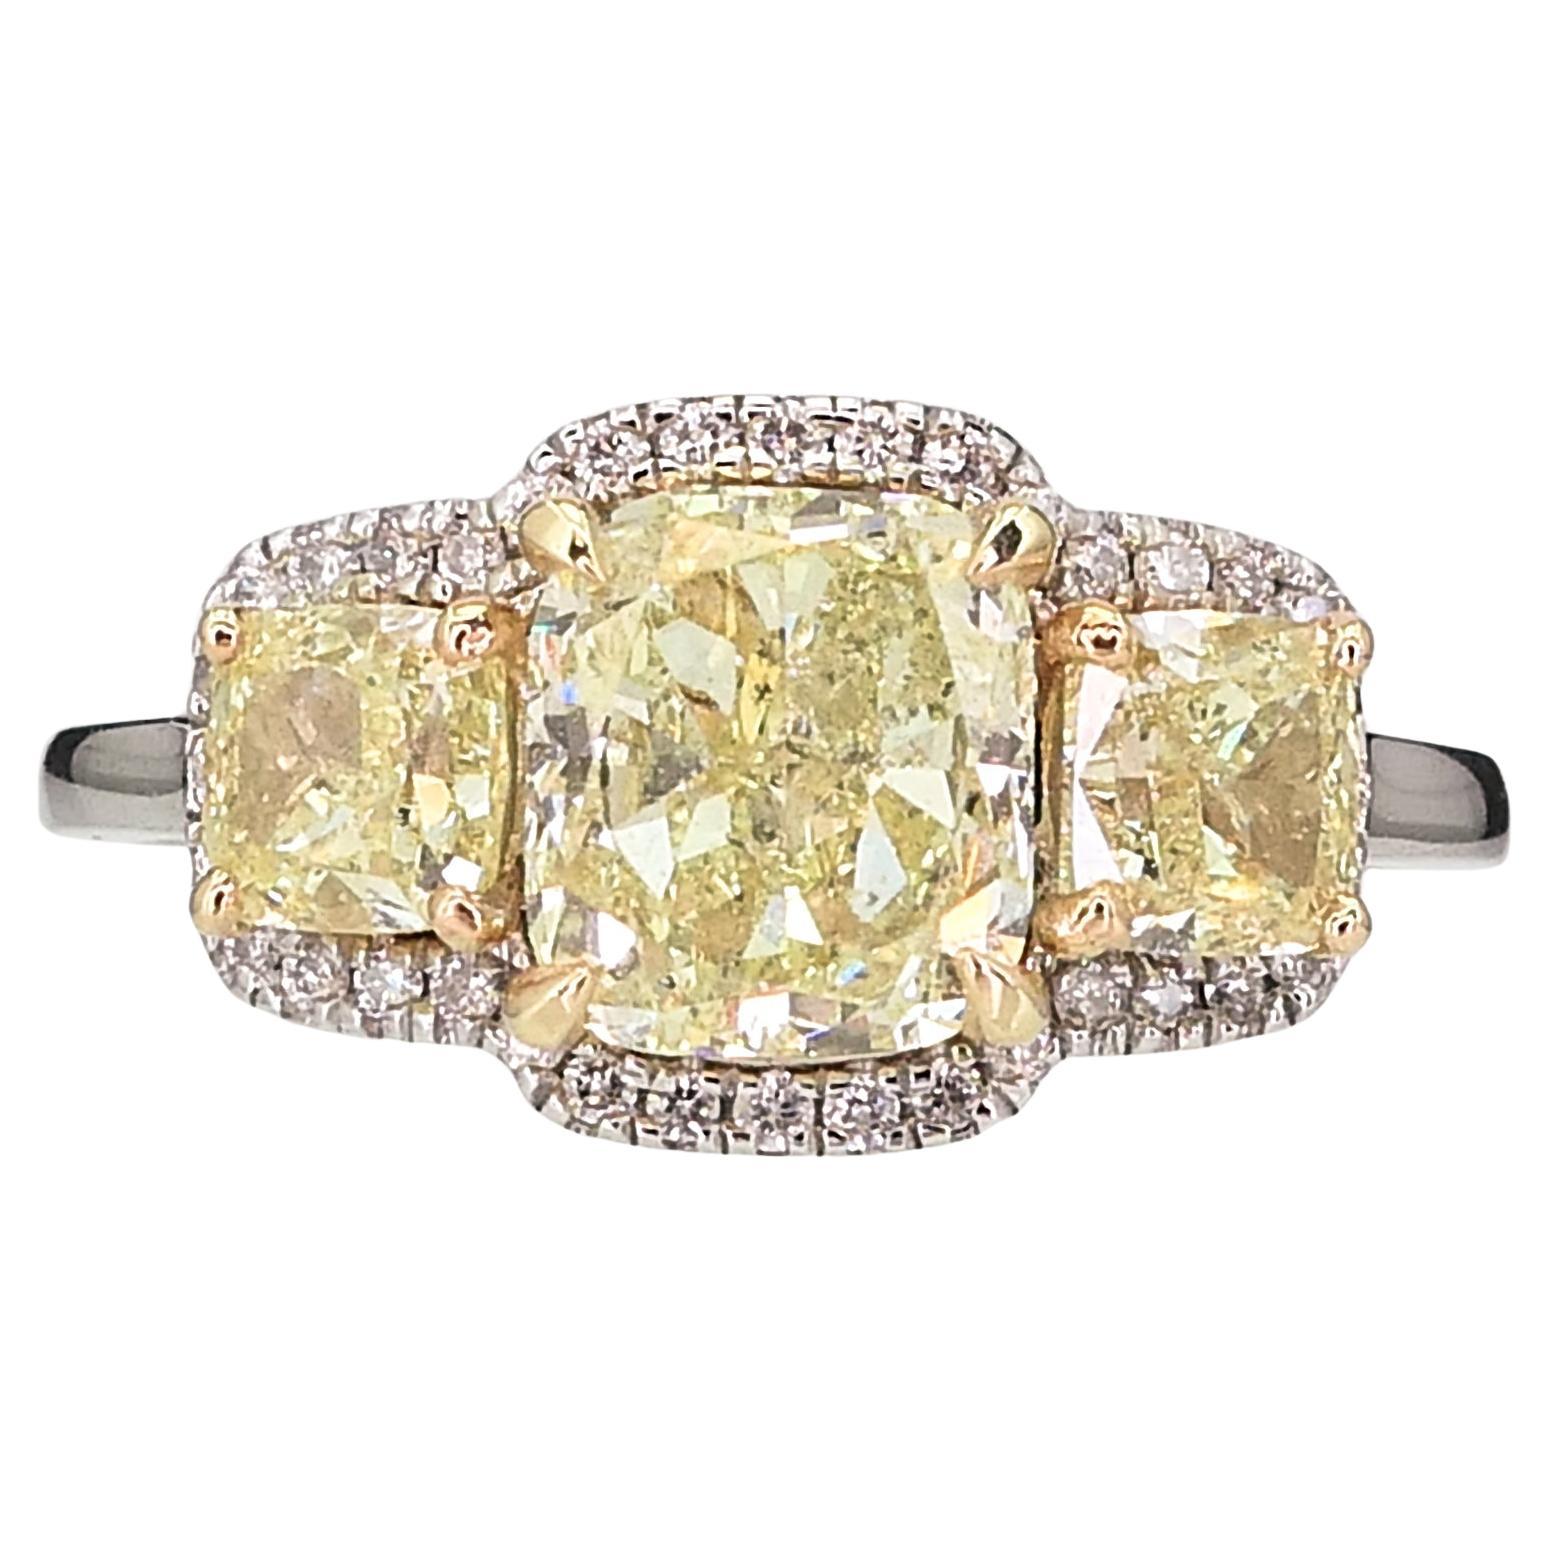 14k White Gold 2.58ctw Natural Fancy Yellow Diamond Engagement Ring i15382